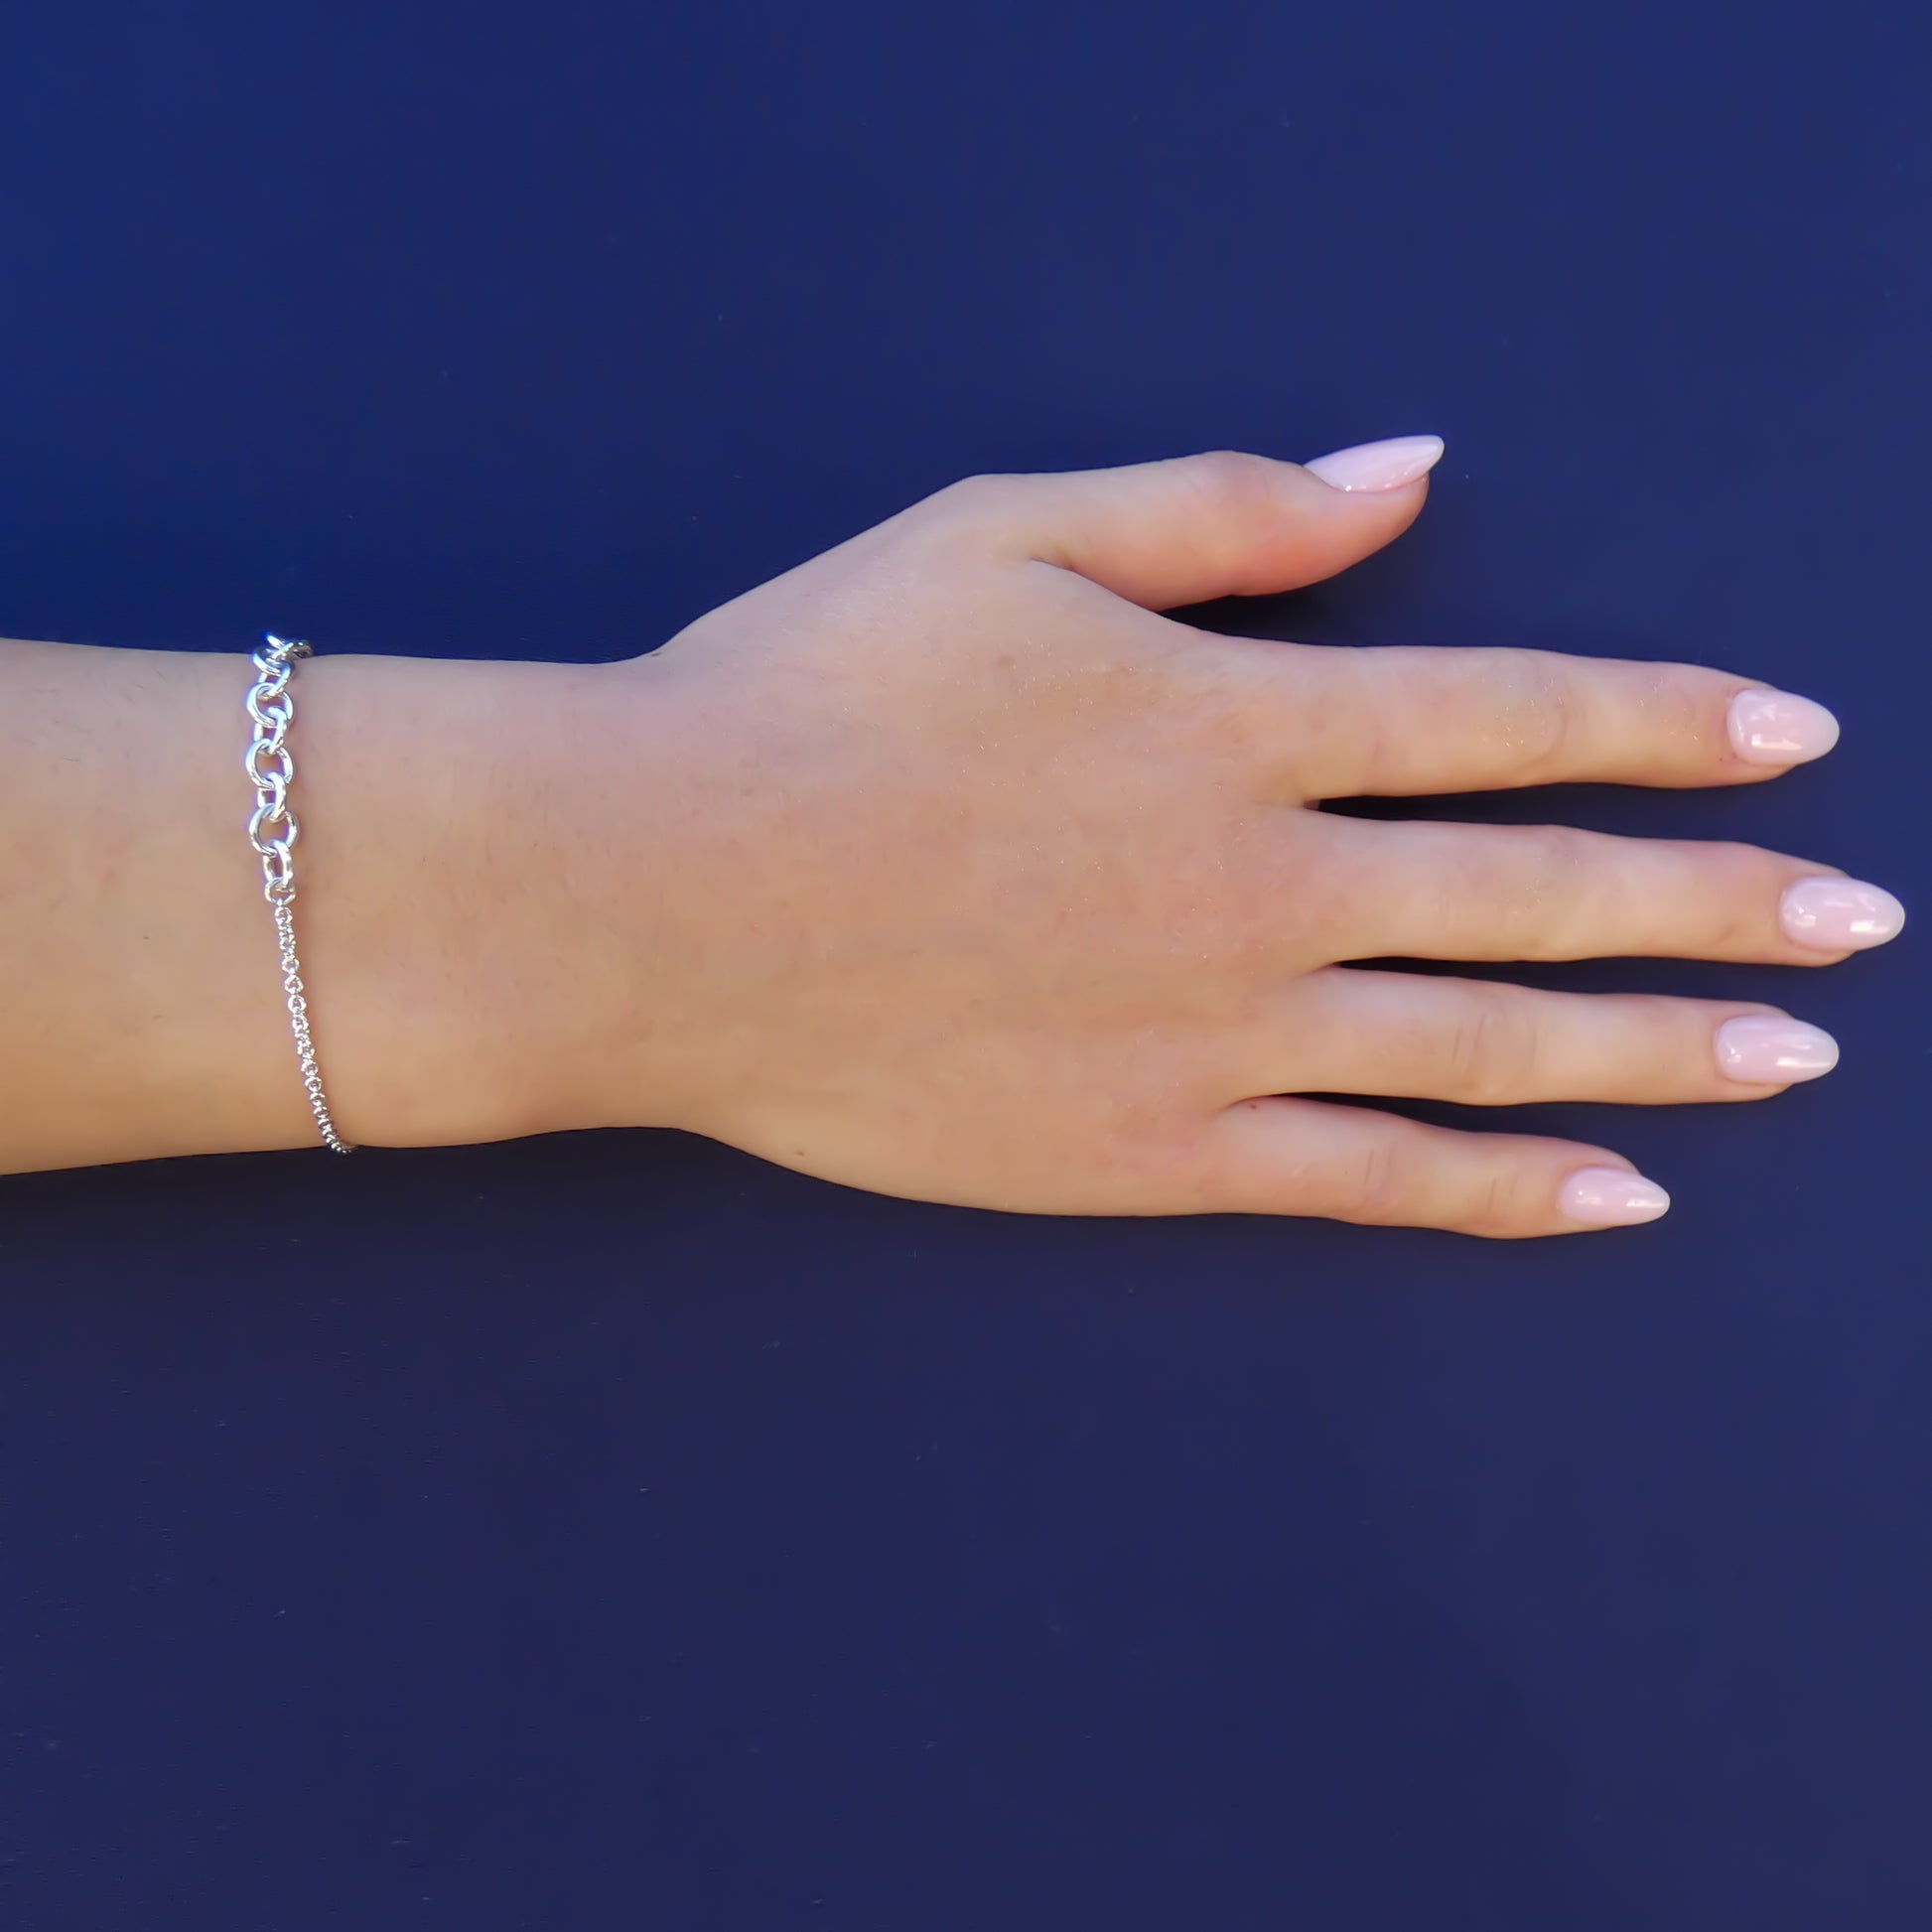 Woman wearing a silver bracelet with two different chain styles end to end.